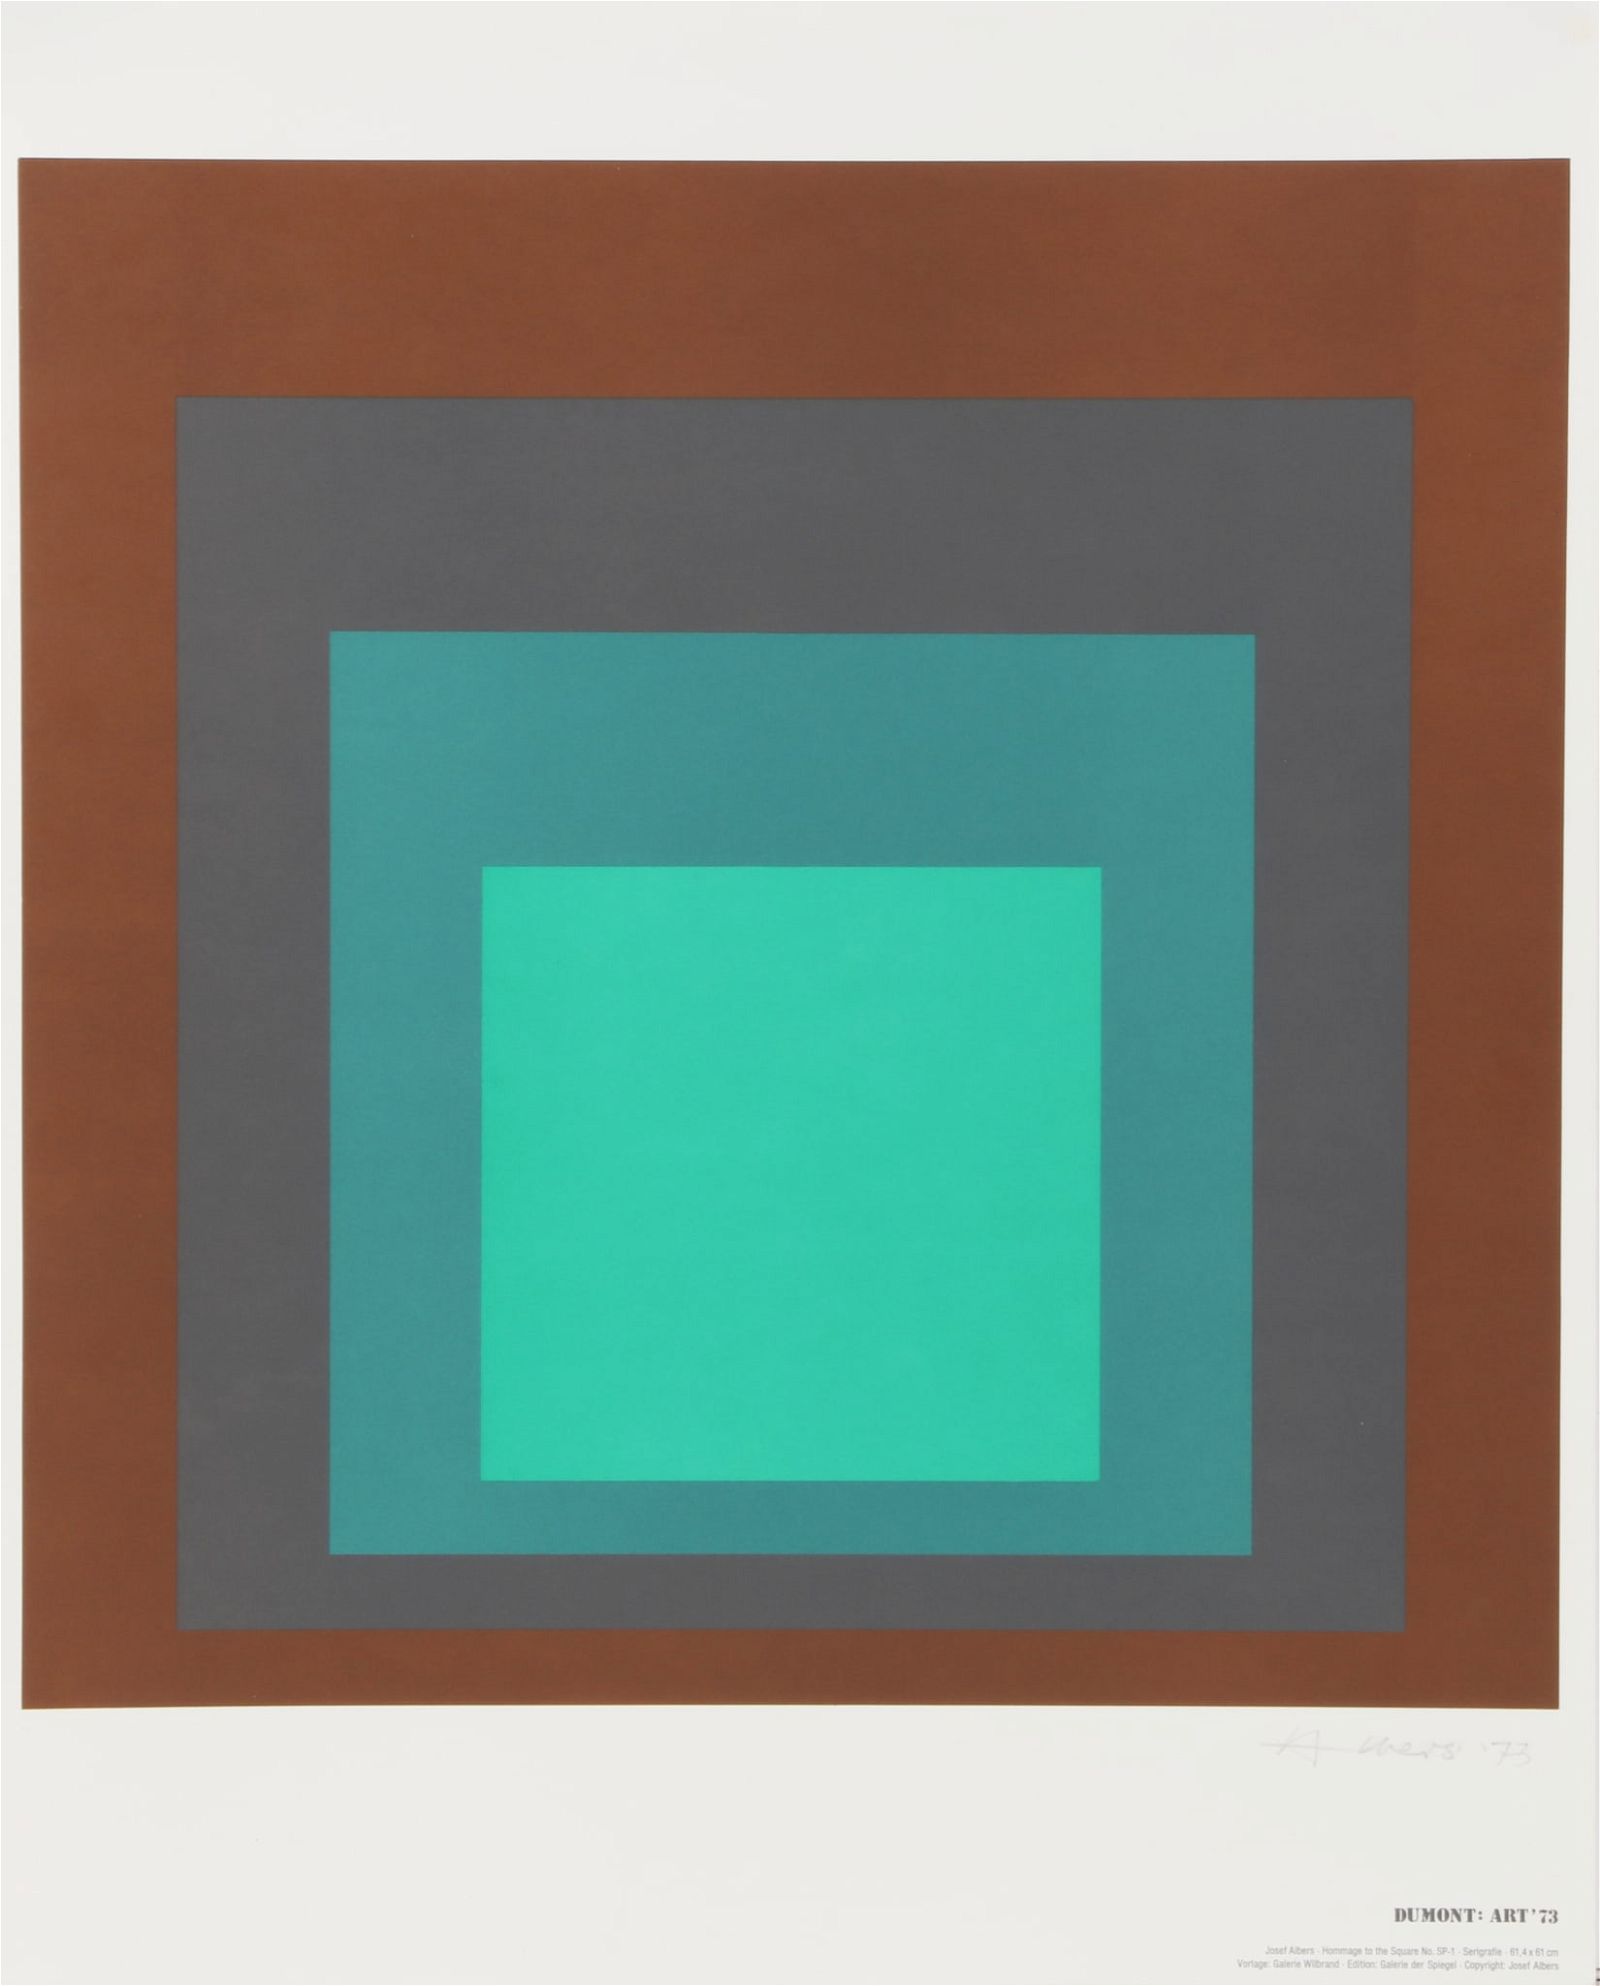 JOSEPH ALBERS, HOMAGE TO THE SQUARE